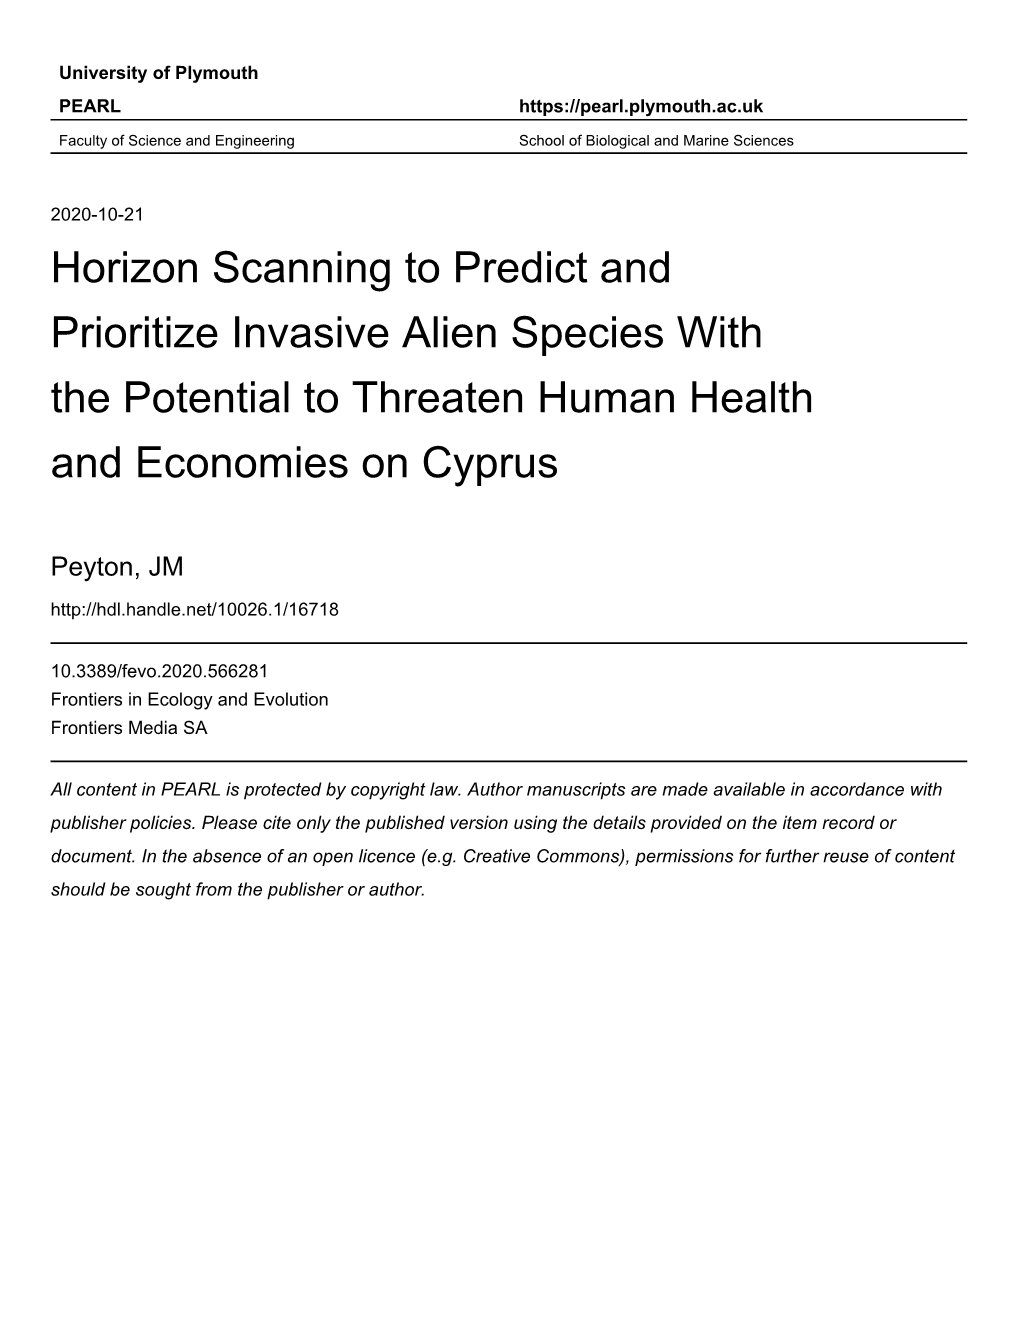 Horizon Scanning to Predict and Prioritise Invasive Alien Species with the Potential to Threaten